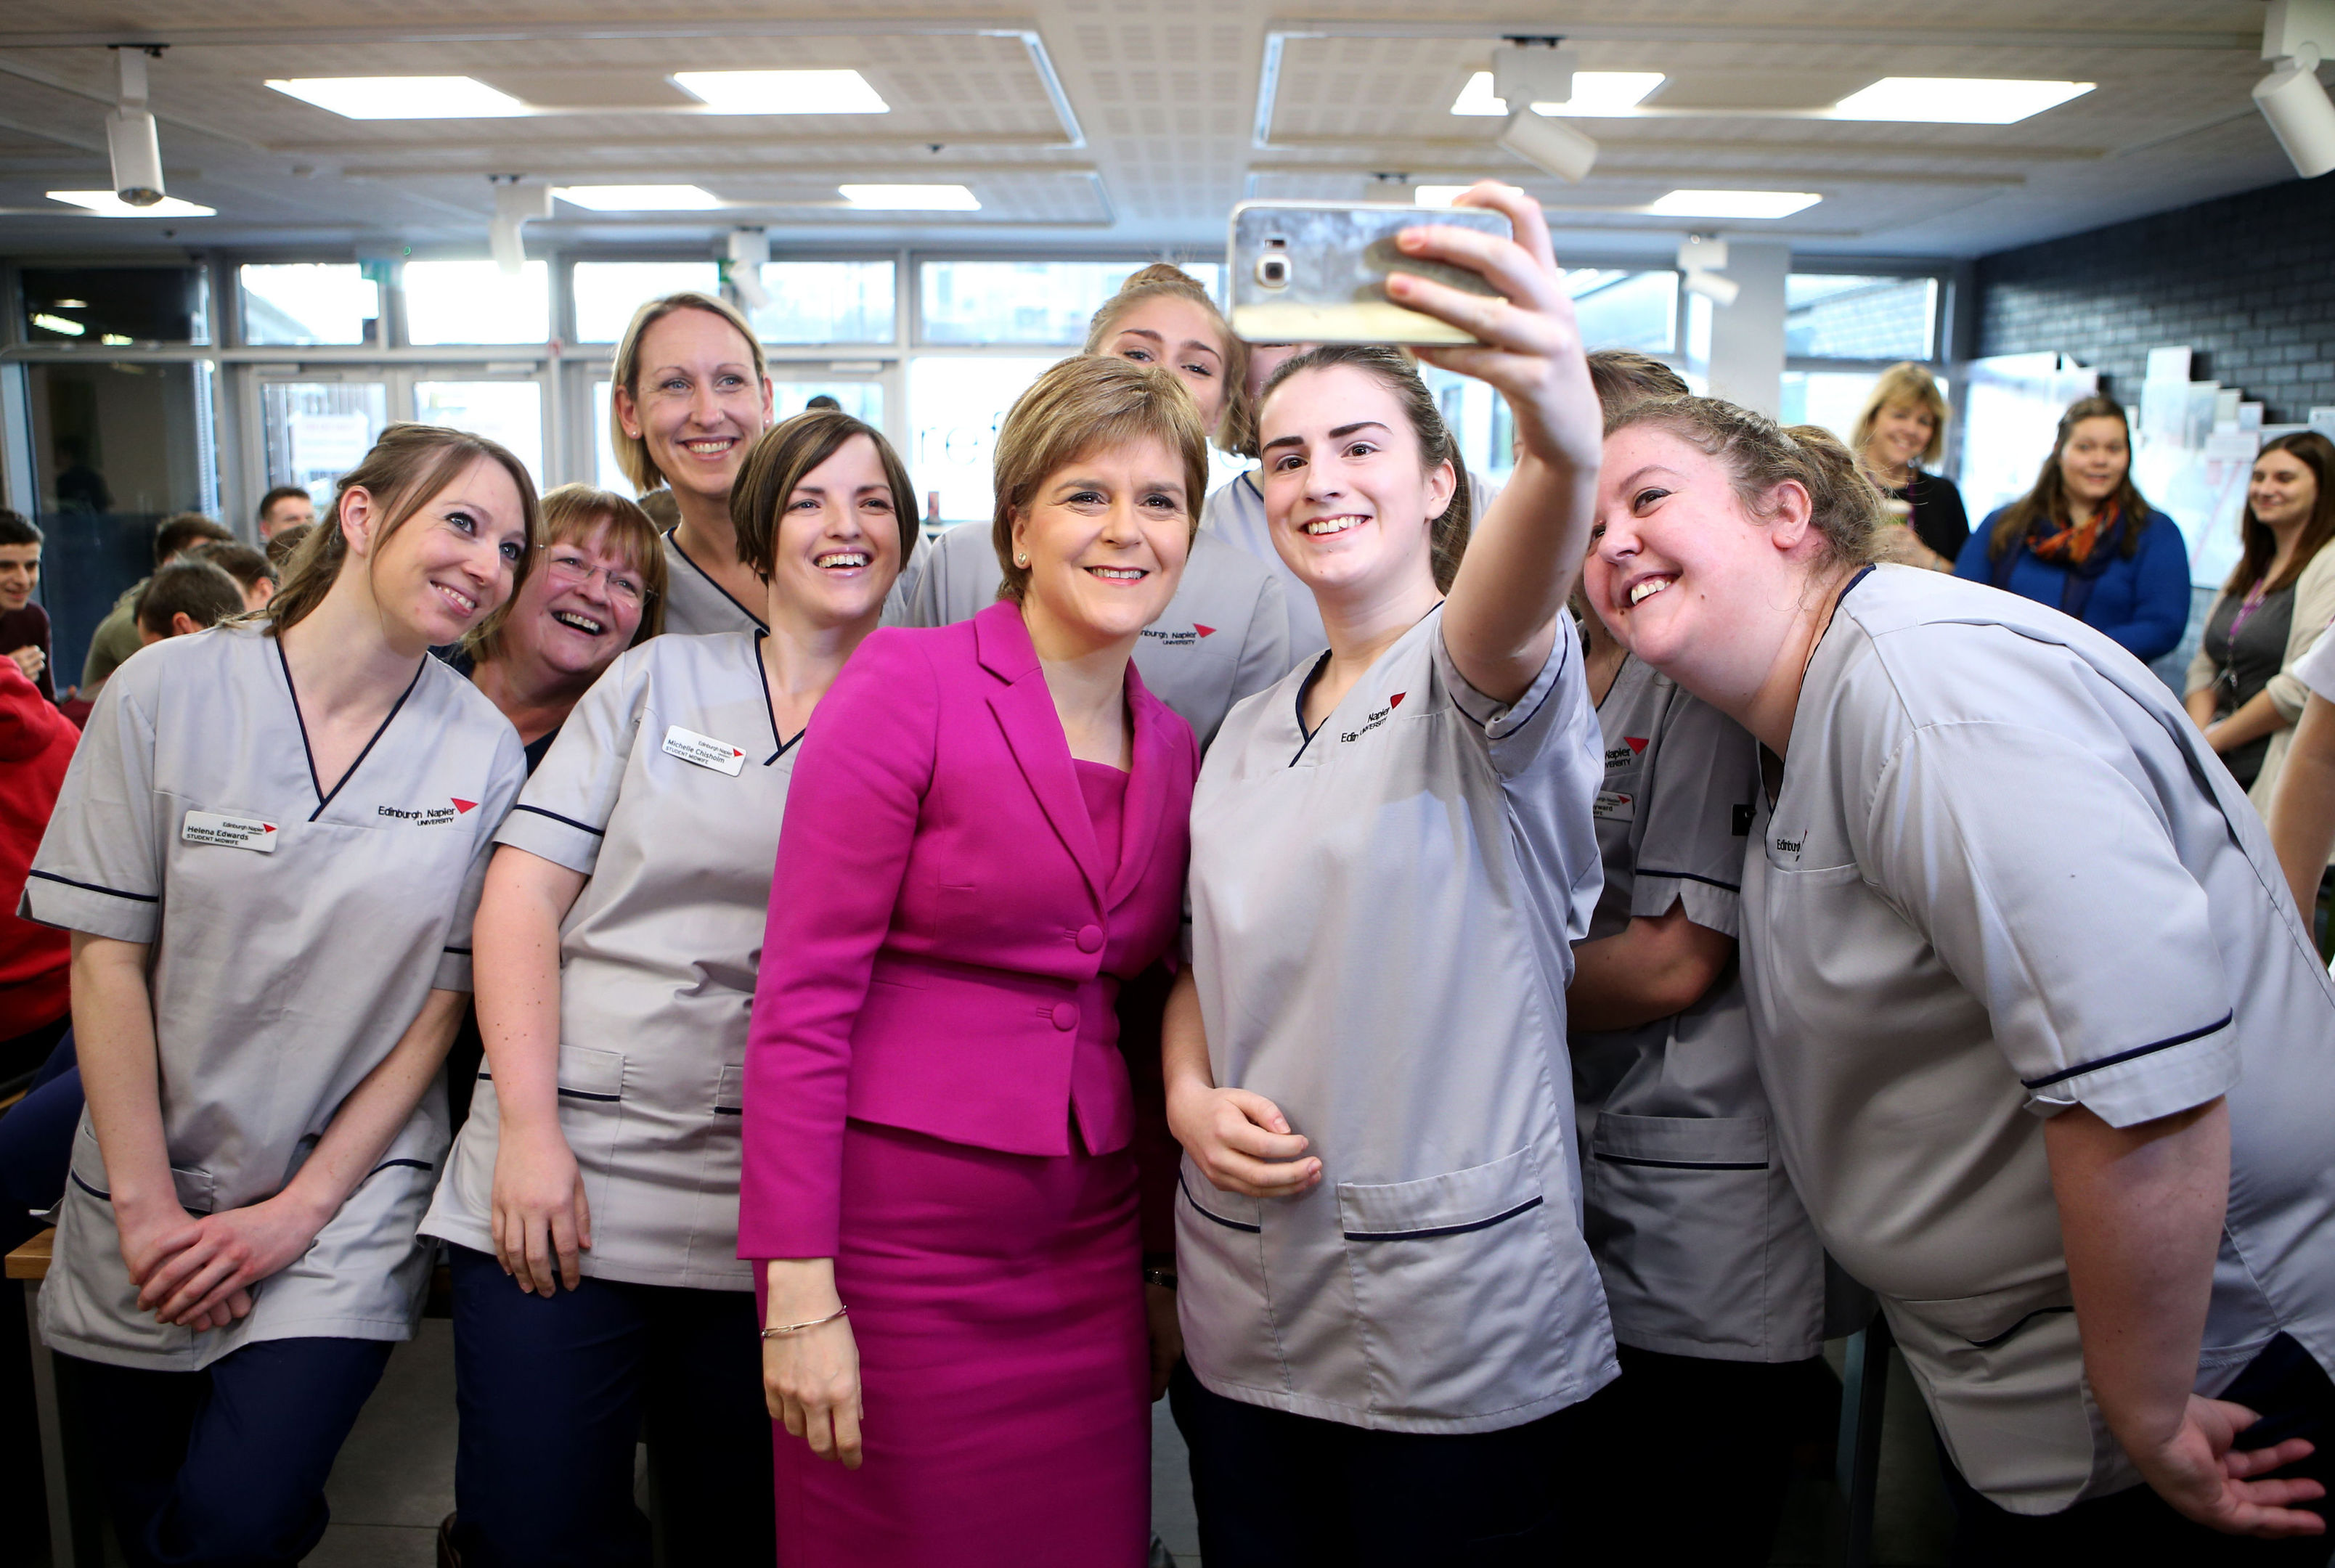 First Minister Nicola Sturgeon poses for a selfie with nursing and midwifery students during a visit to Edinburgh Napier University. (Jane Barlow/PA Wire)